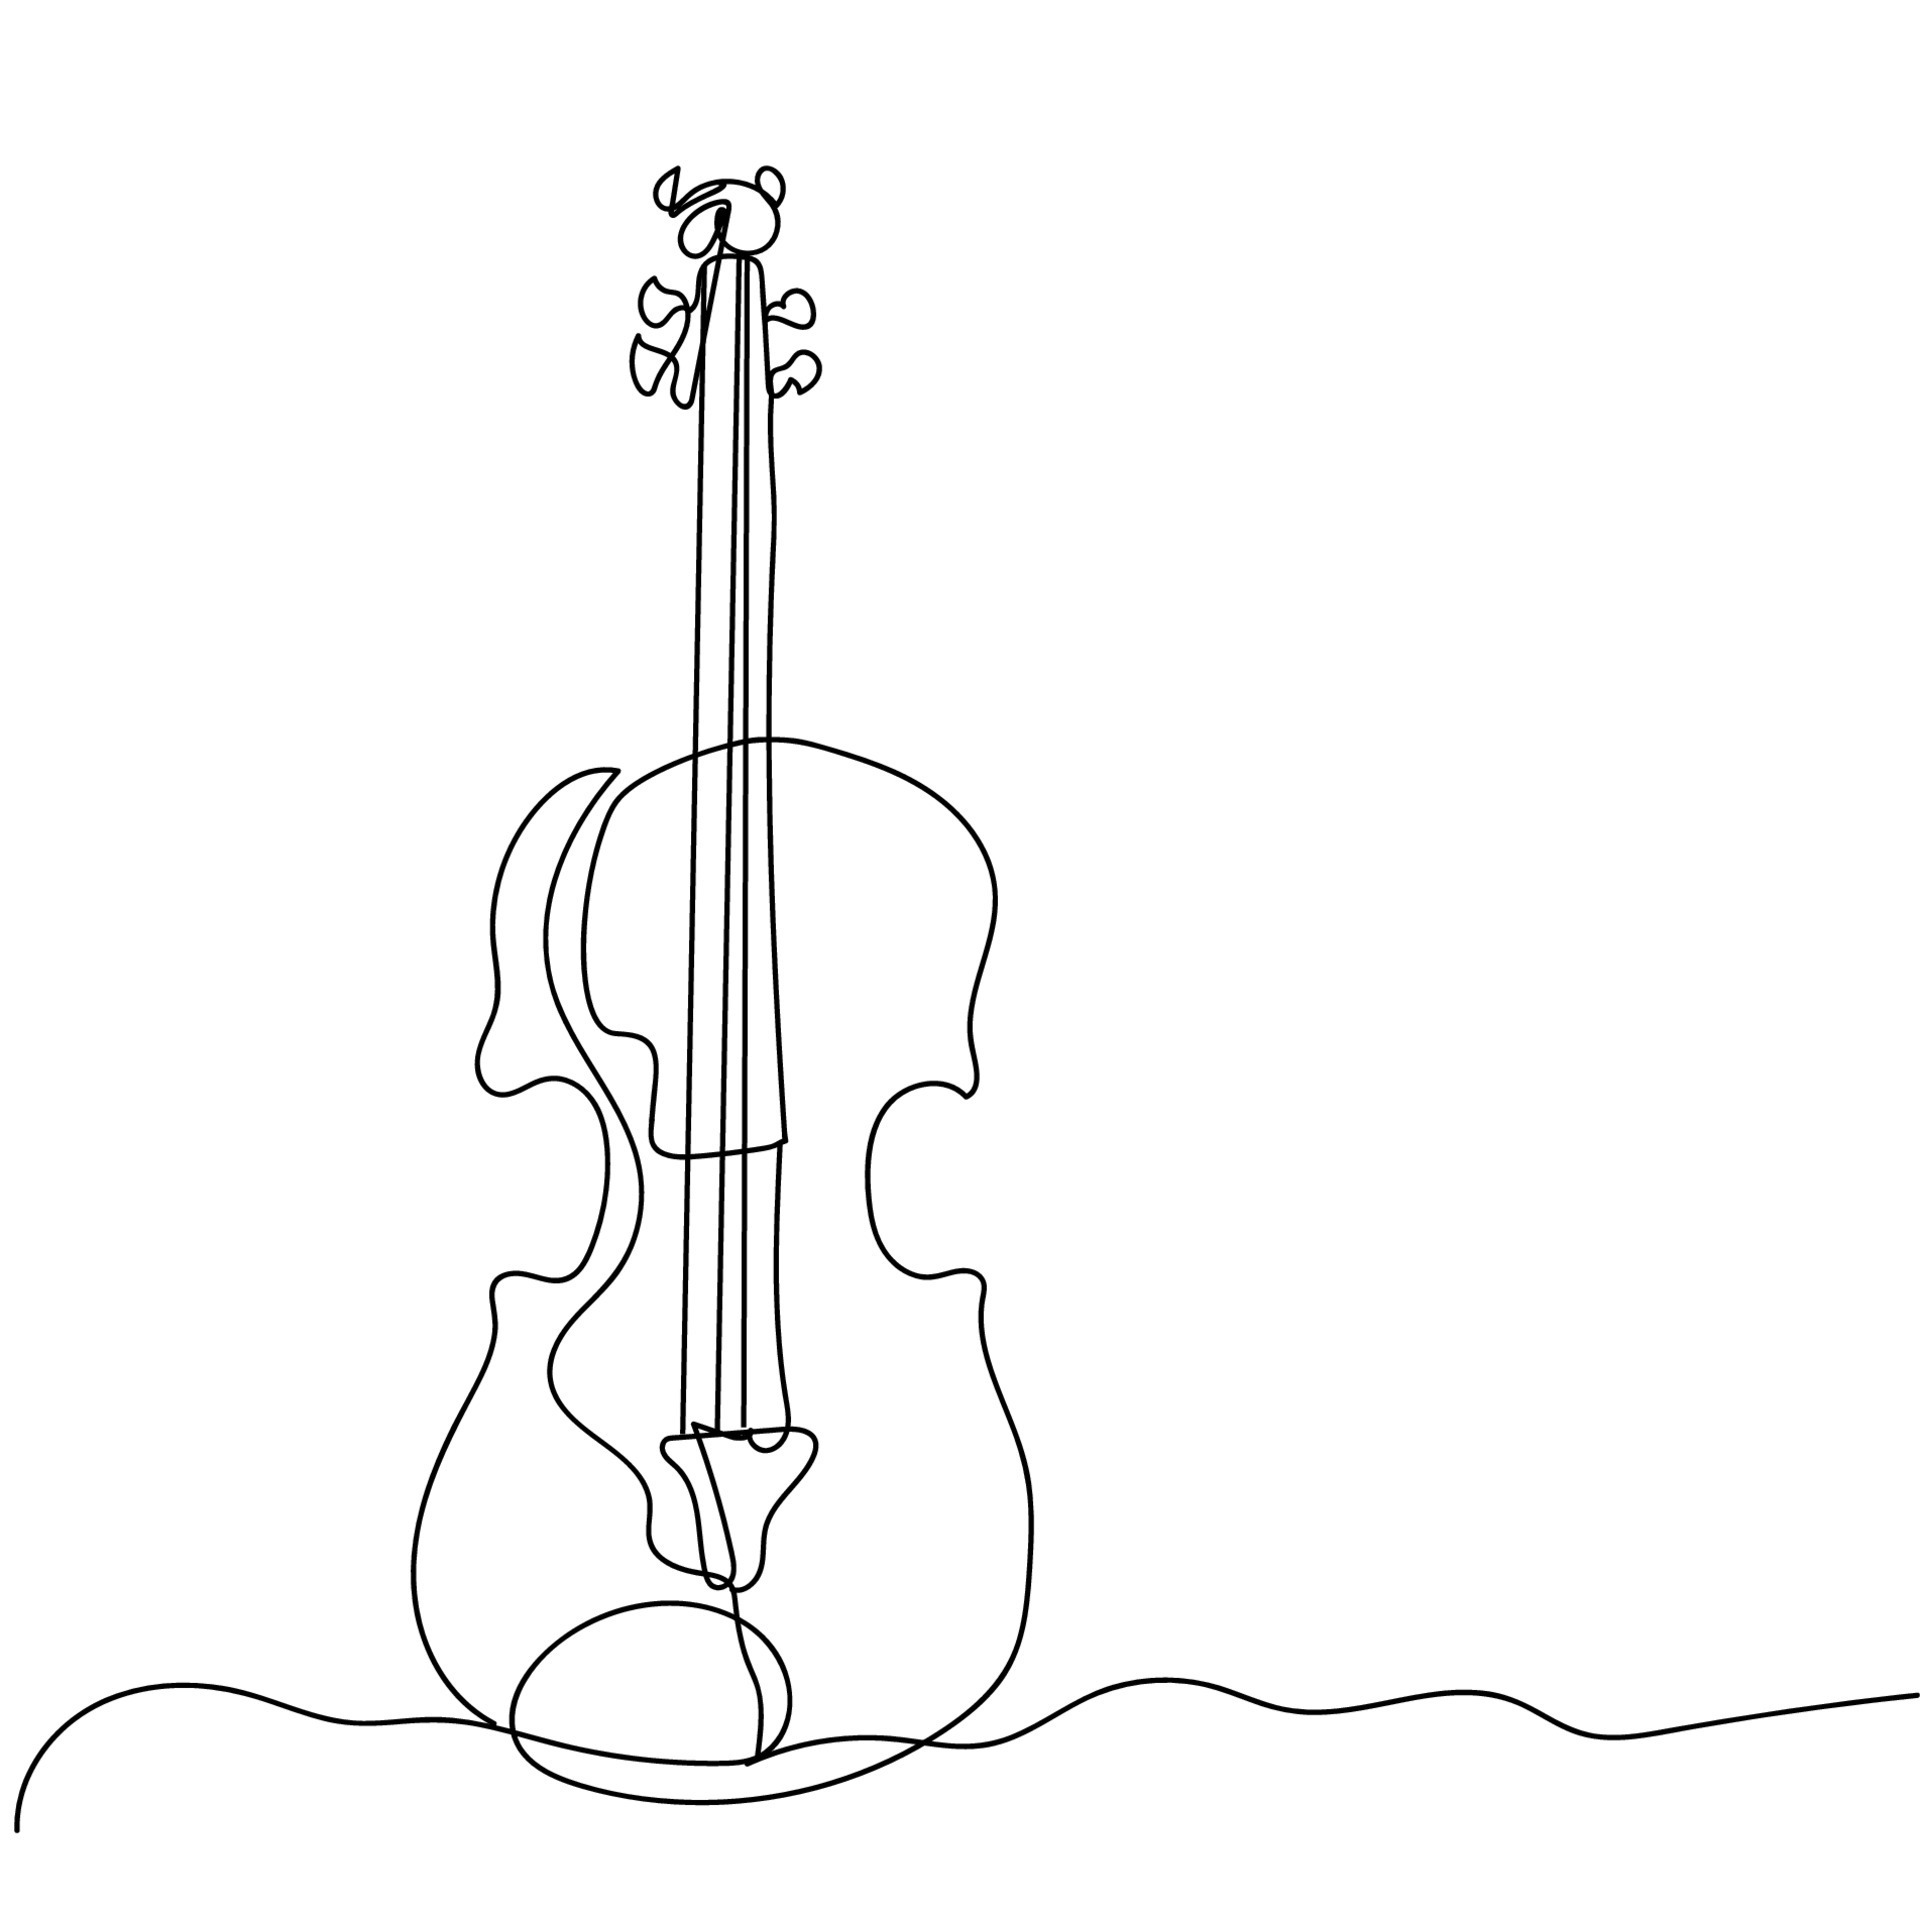 Outline icon music - violin and bow Royalty Free Vector